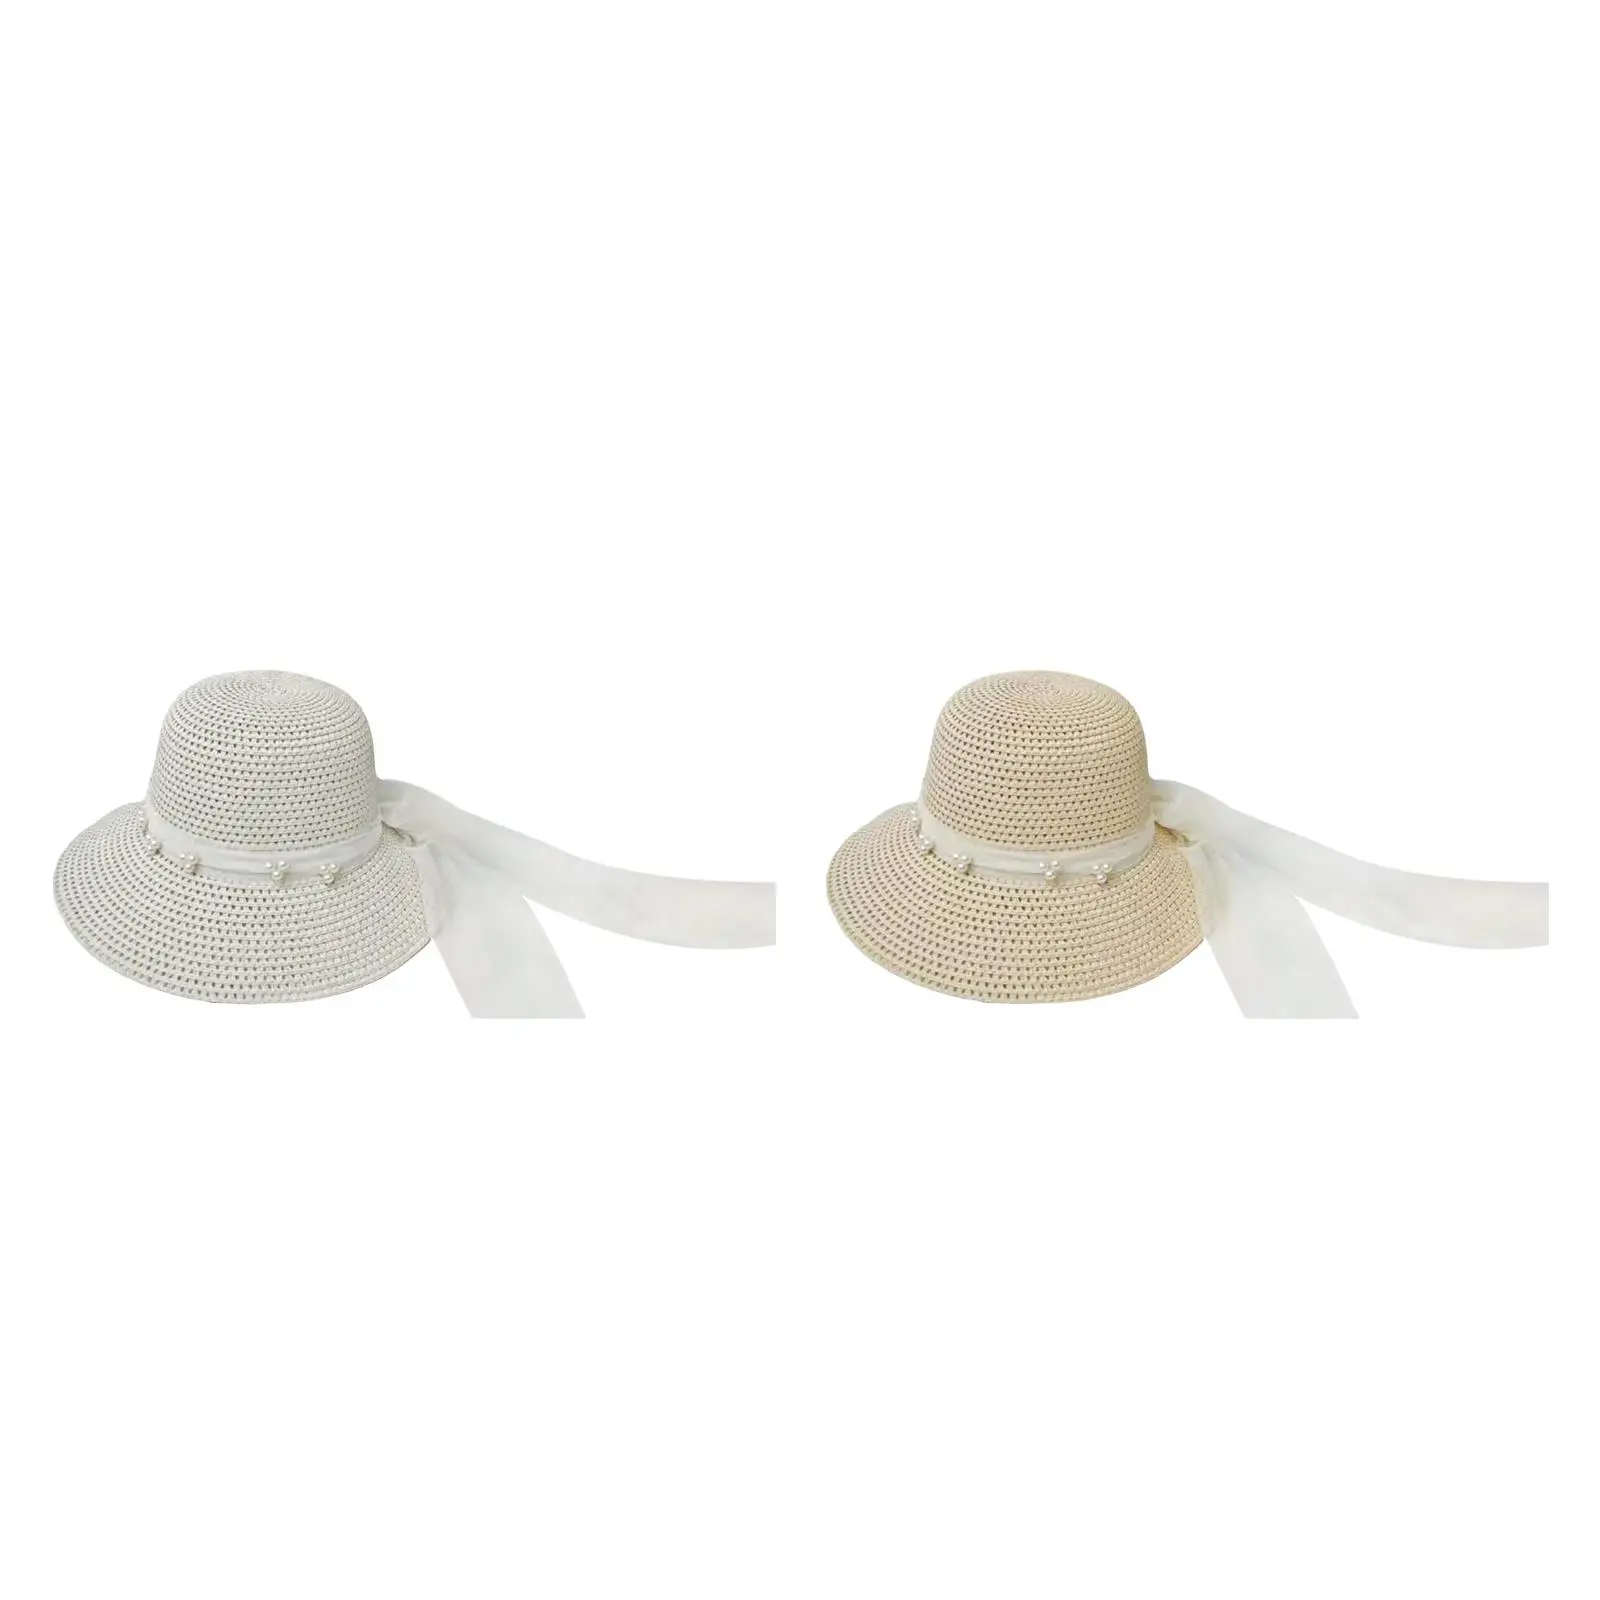 Womens Wide Brim Straw Hats, Lightweight Foldable Breathable Summer Beach Hats,